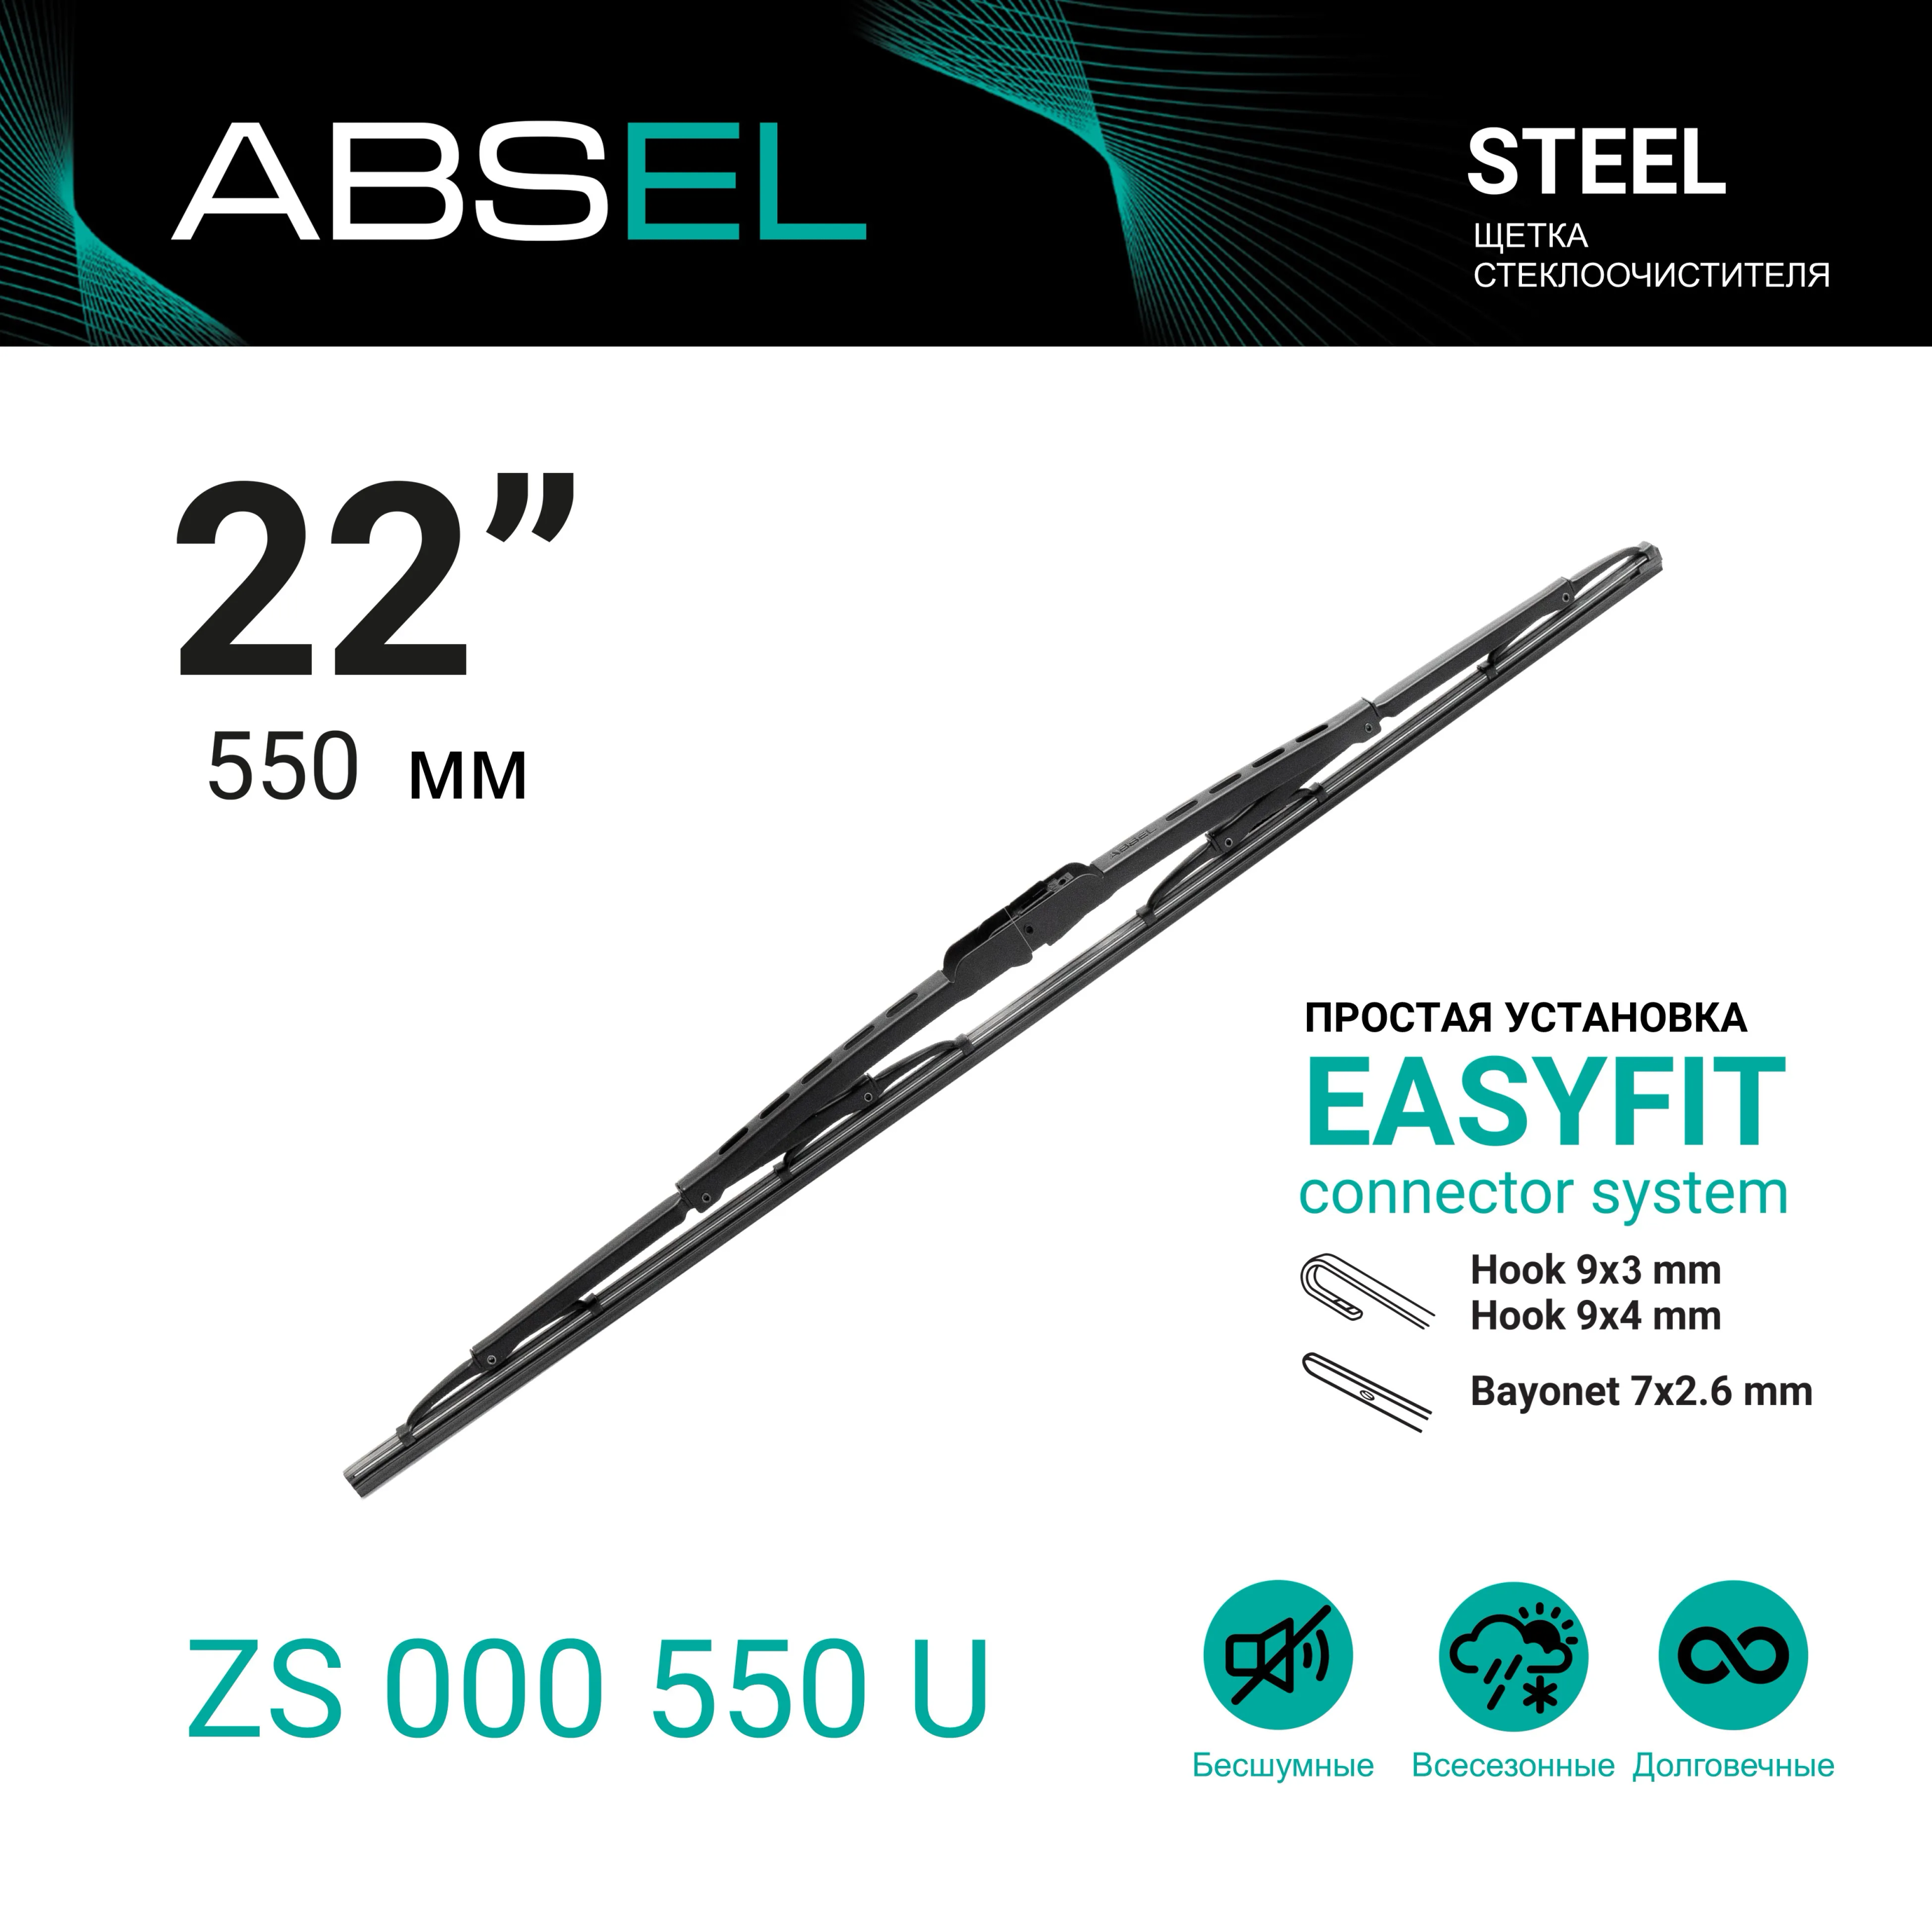 CONVENTIONAL METAL WIPER BLADE